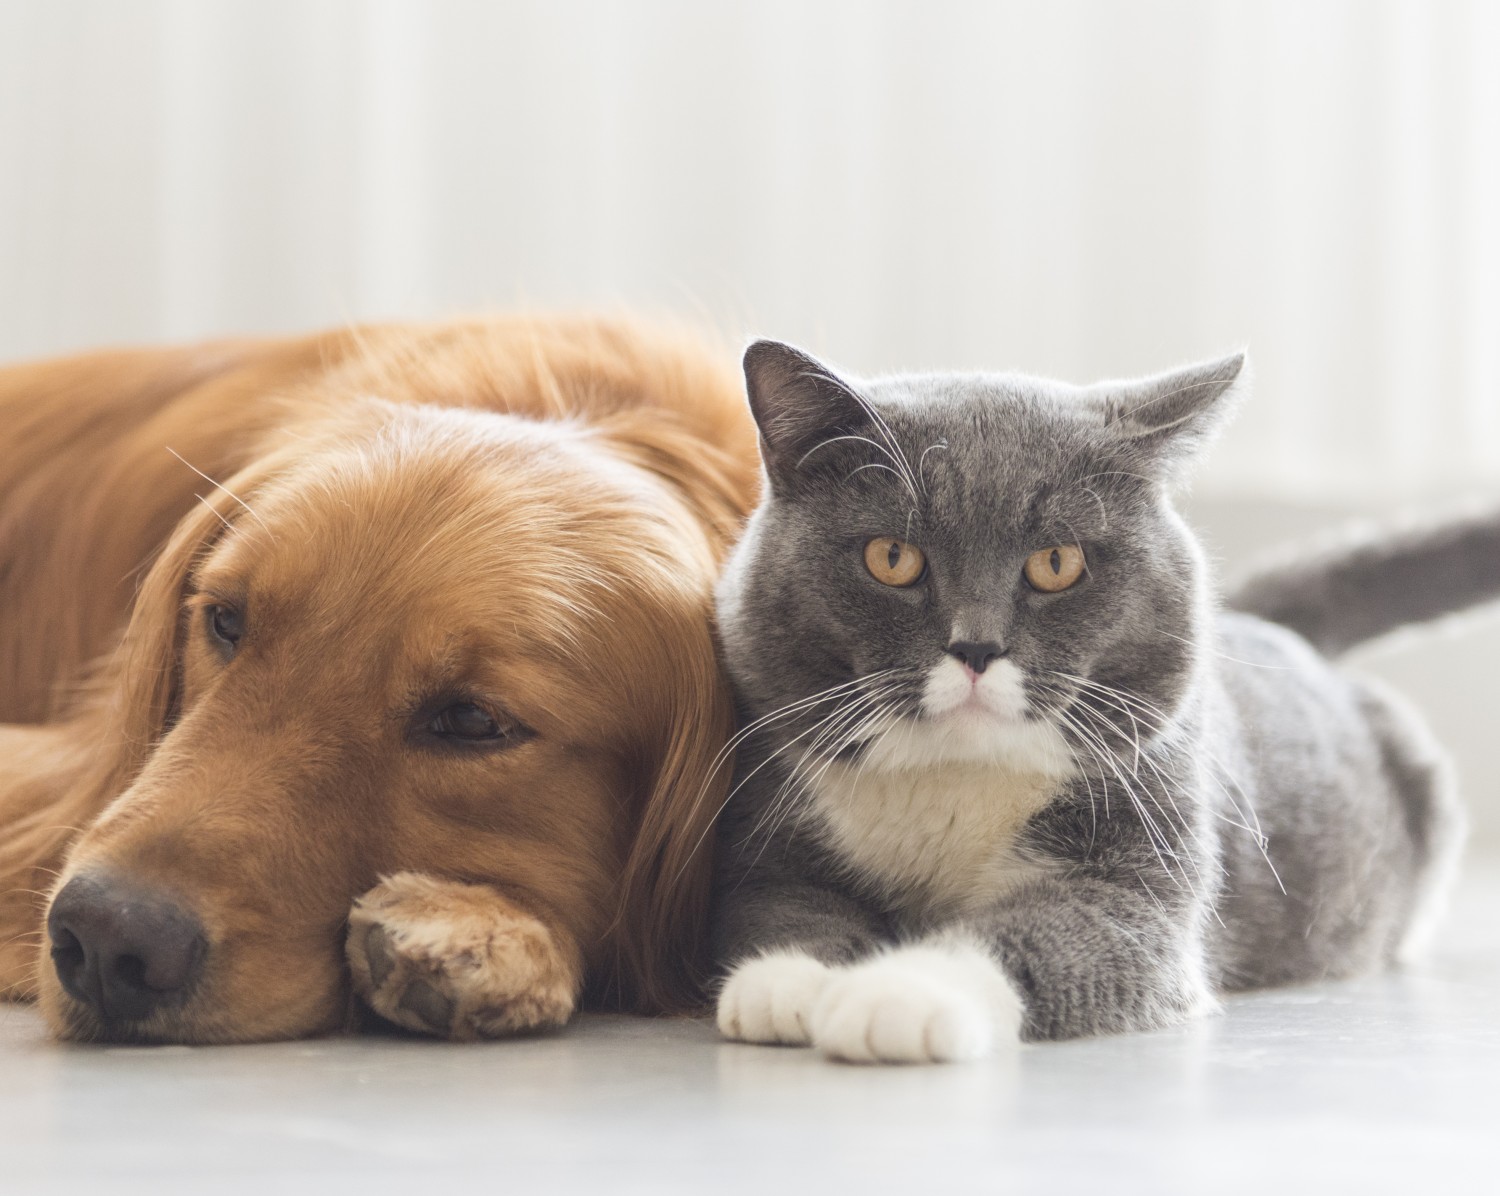 Golden Retriever with Grey and White Cat